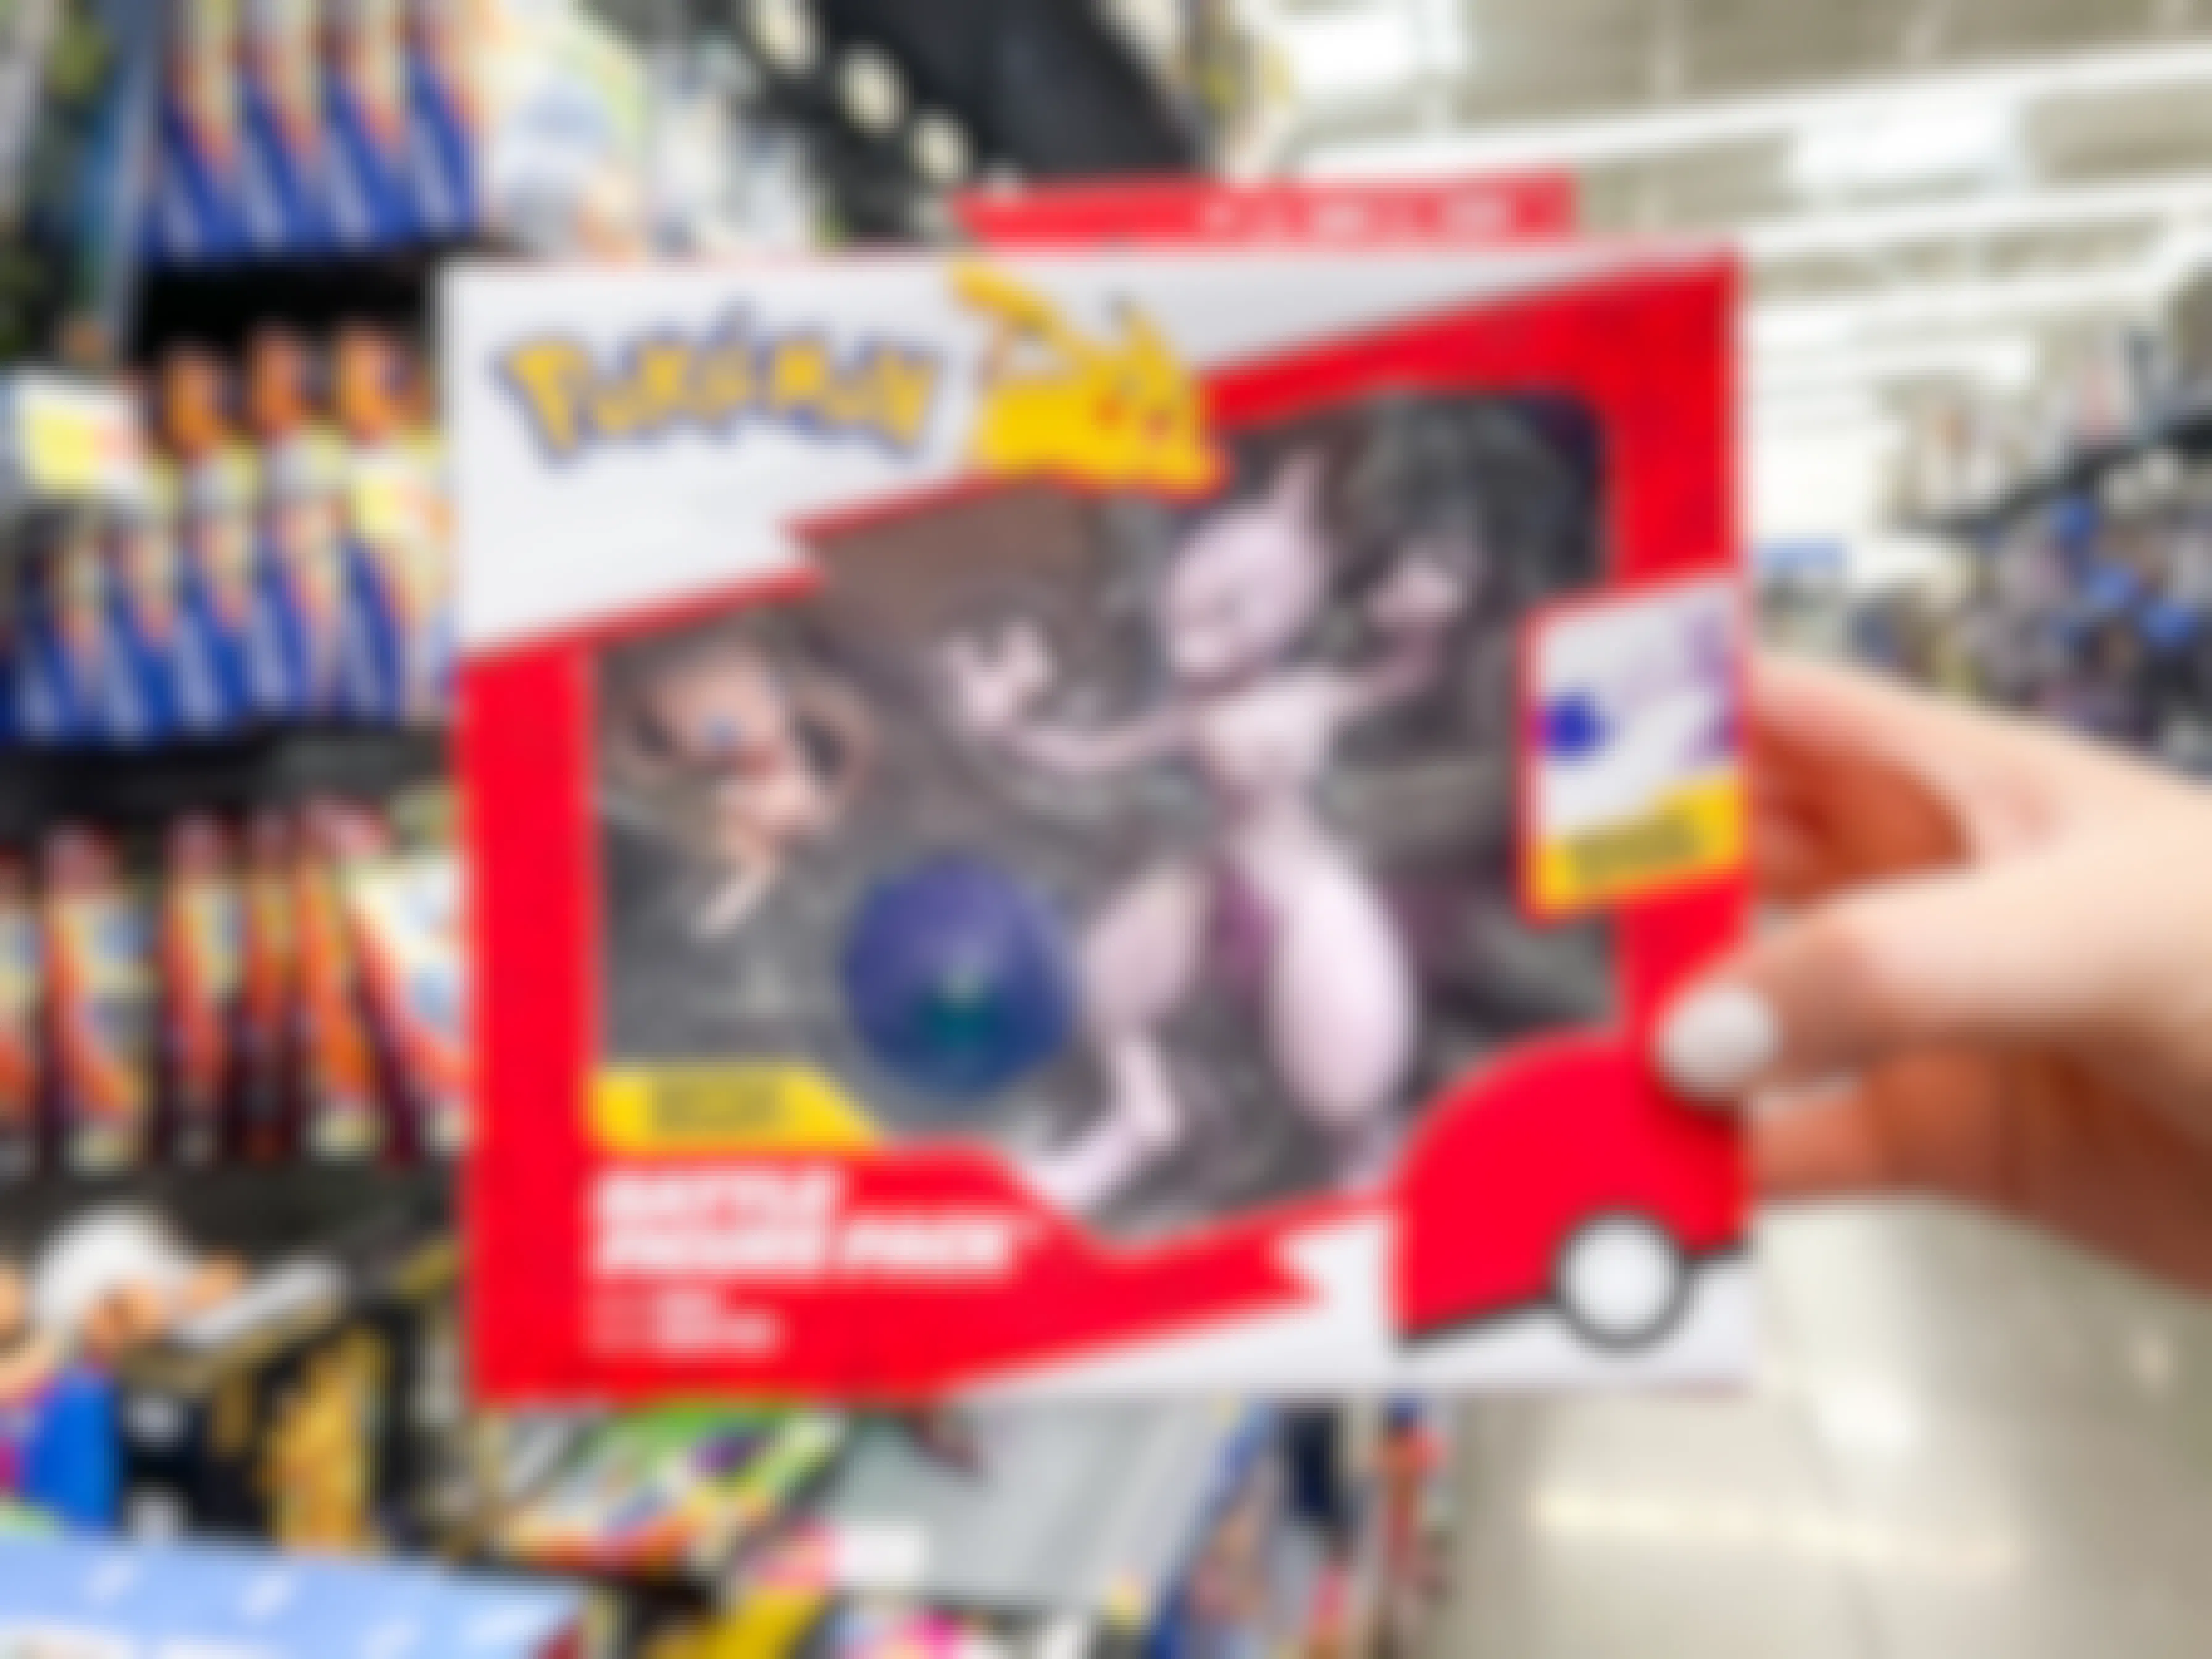 A person's hand holding a Pokemon Mew and Mewtwo figure pack in front of a Walmart shelf